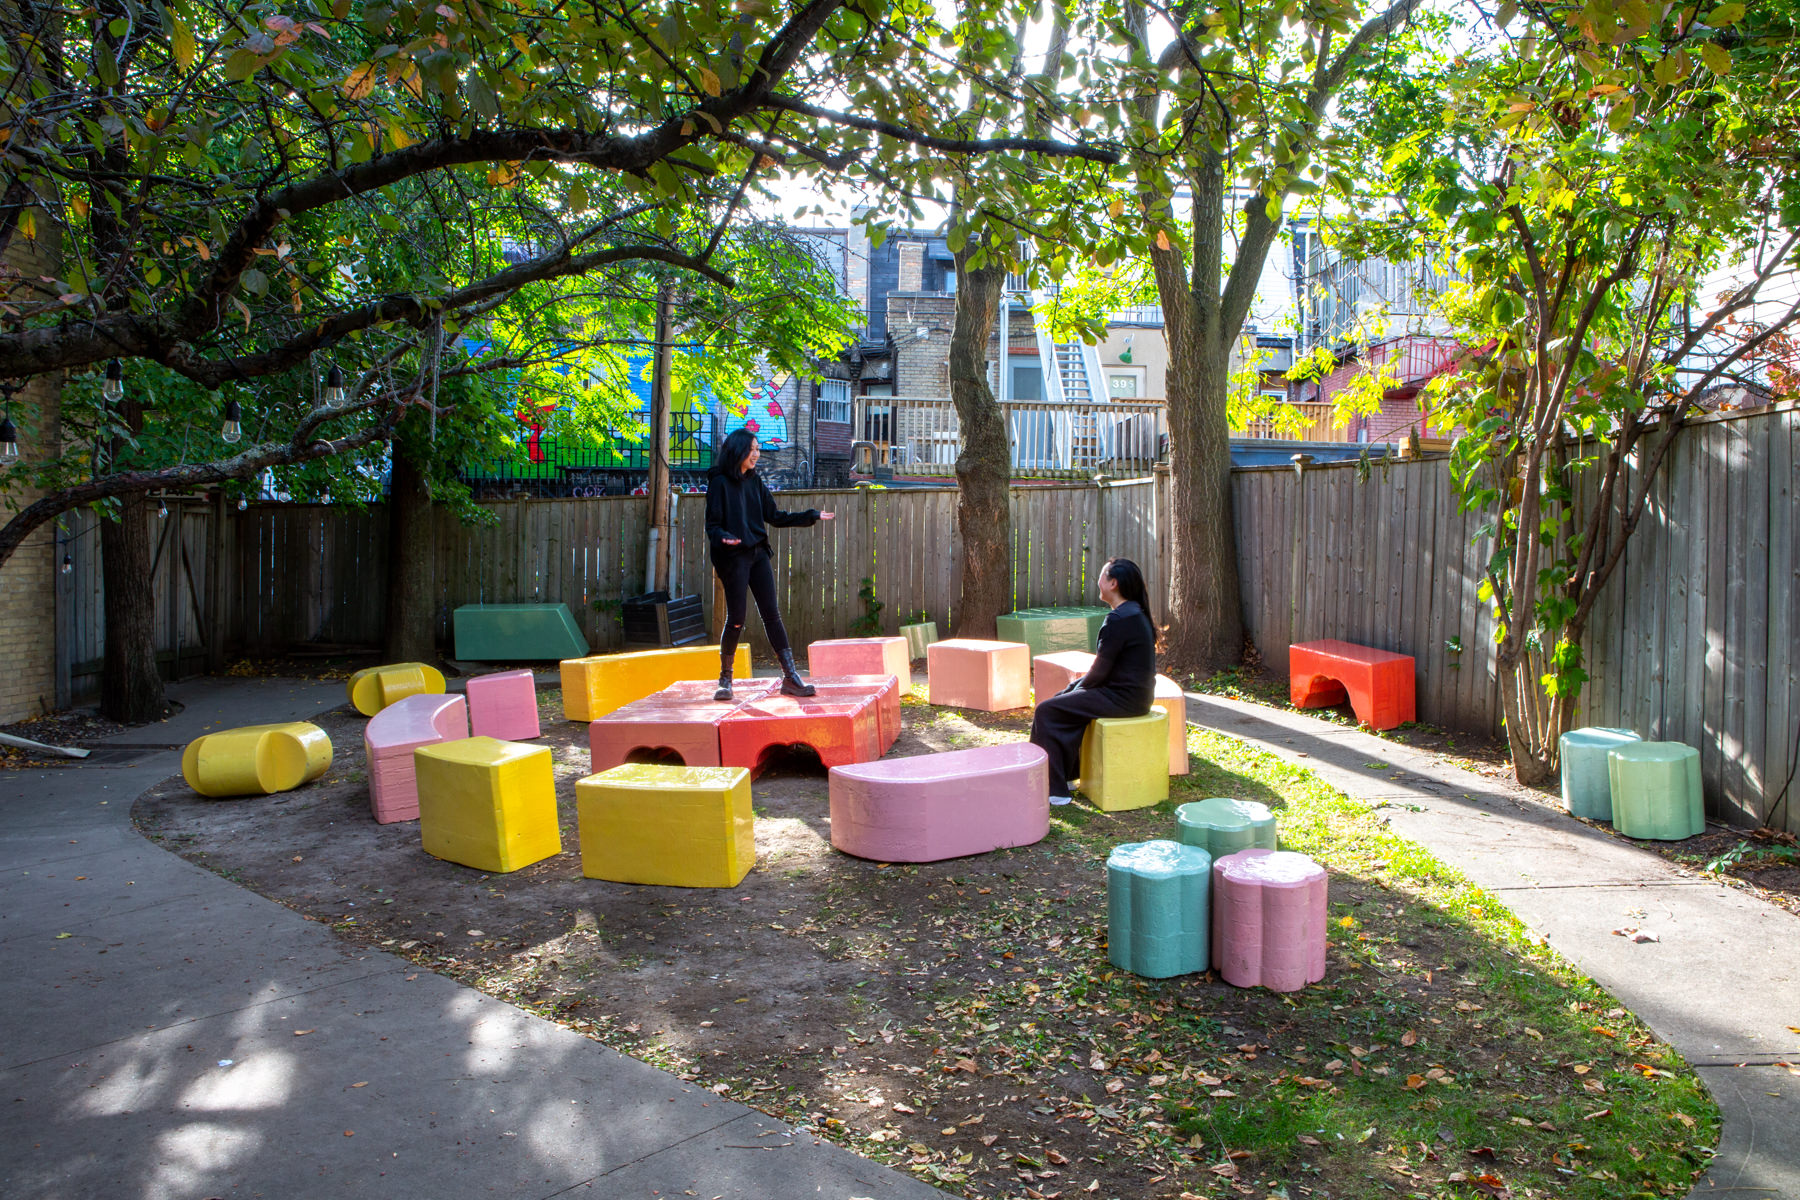 Wide-angle view of about 20 large-scale, colourful blocks from Cecil Community Planting Imagination project. One person sits on blocks looking at someone standing on top of another block.